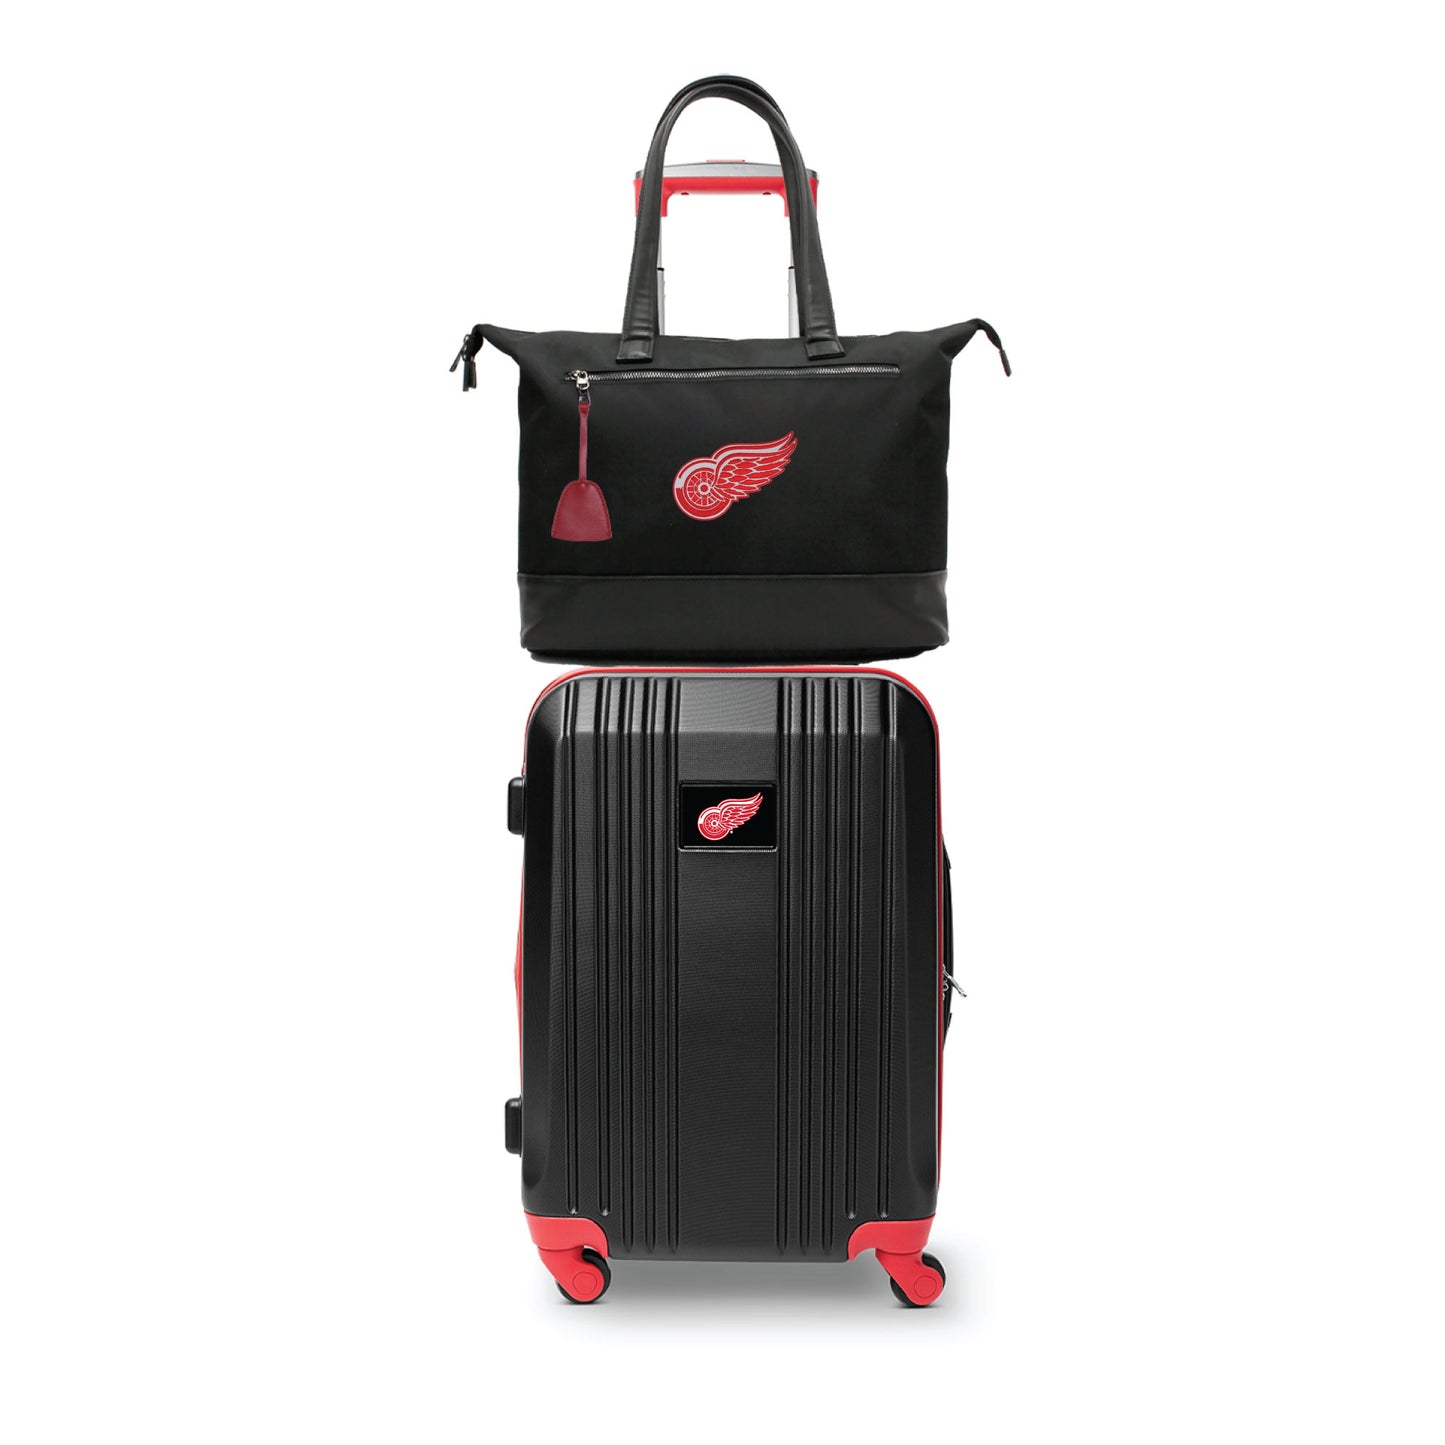 Detroit Red Wings Premium Laptop Tote Bag and Luggage Set